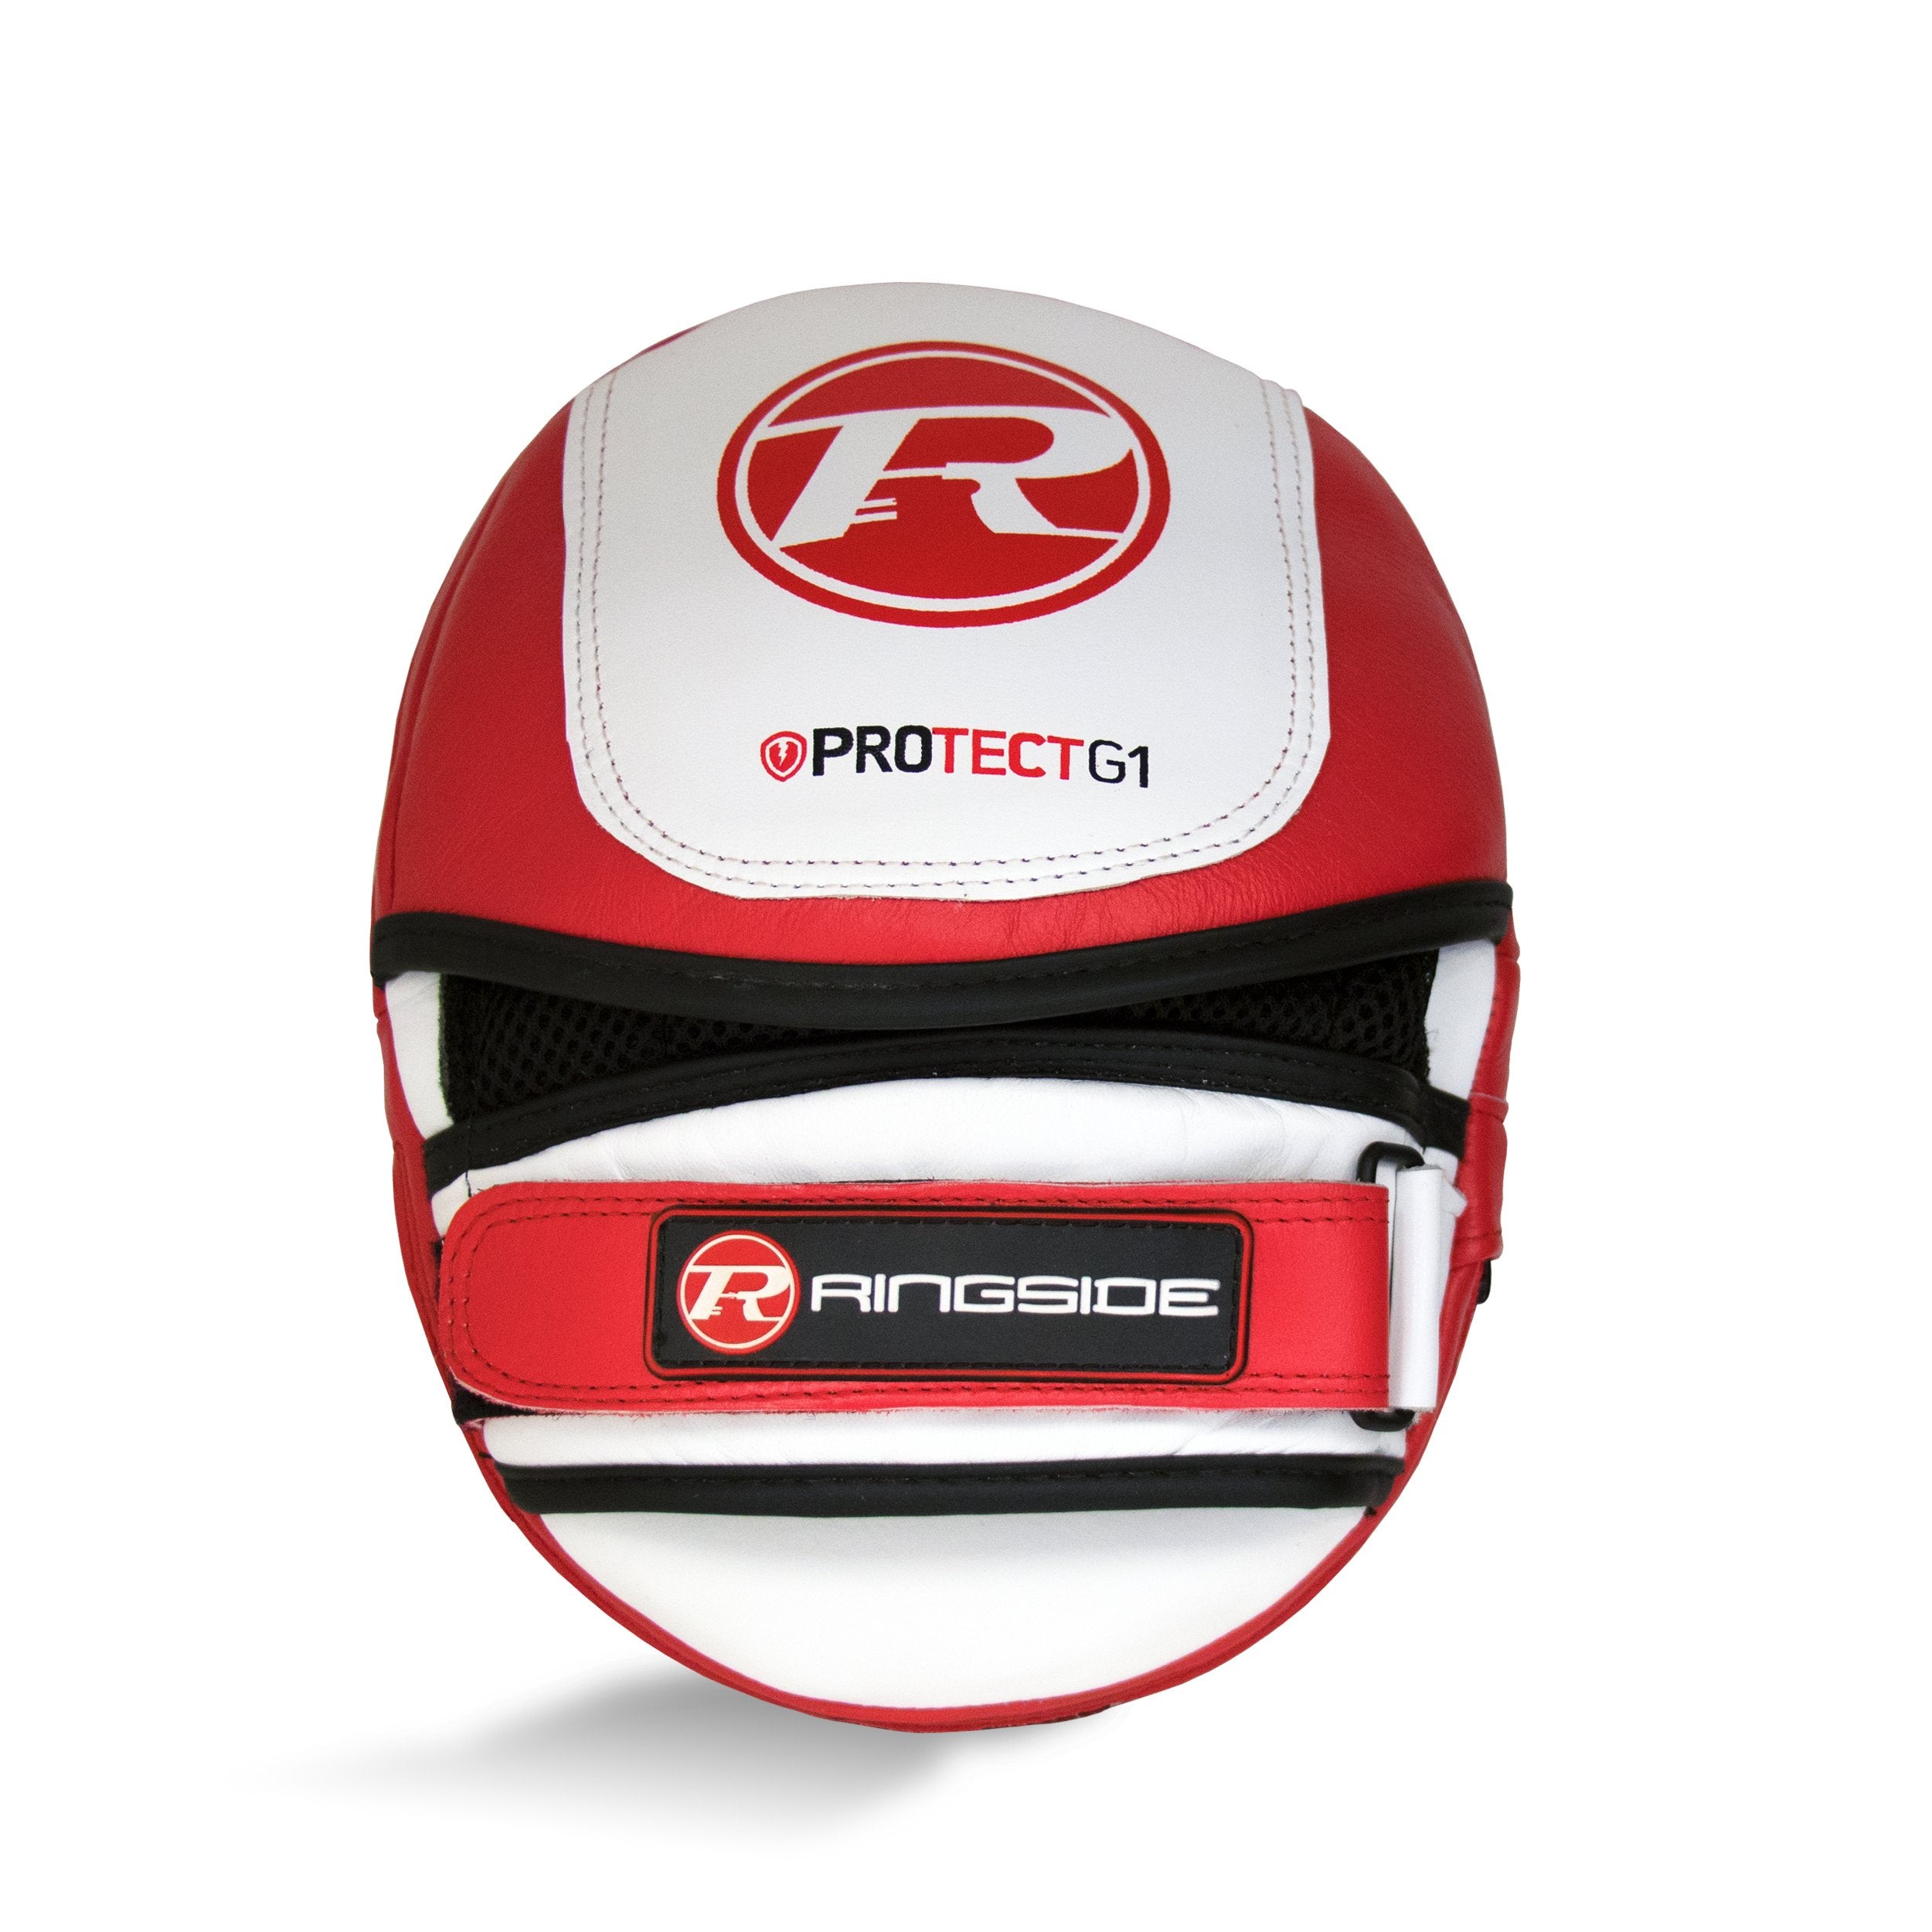 Protect G1 Focus Pads Red / White / Black